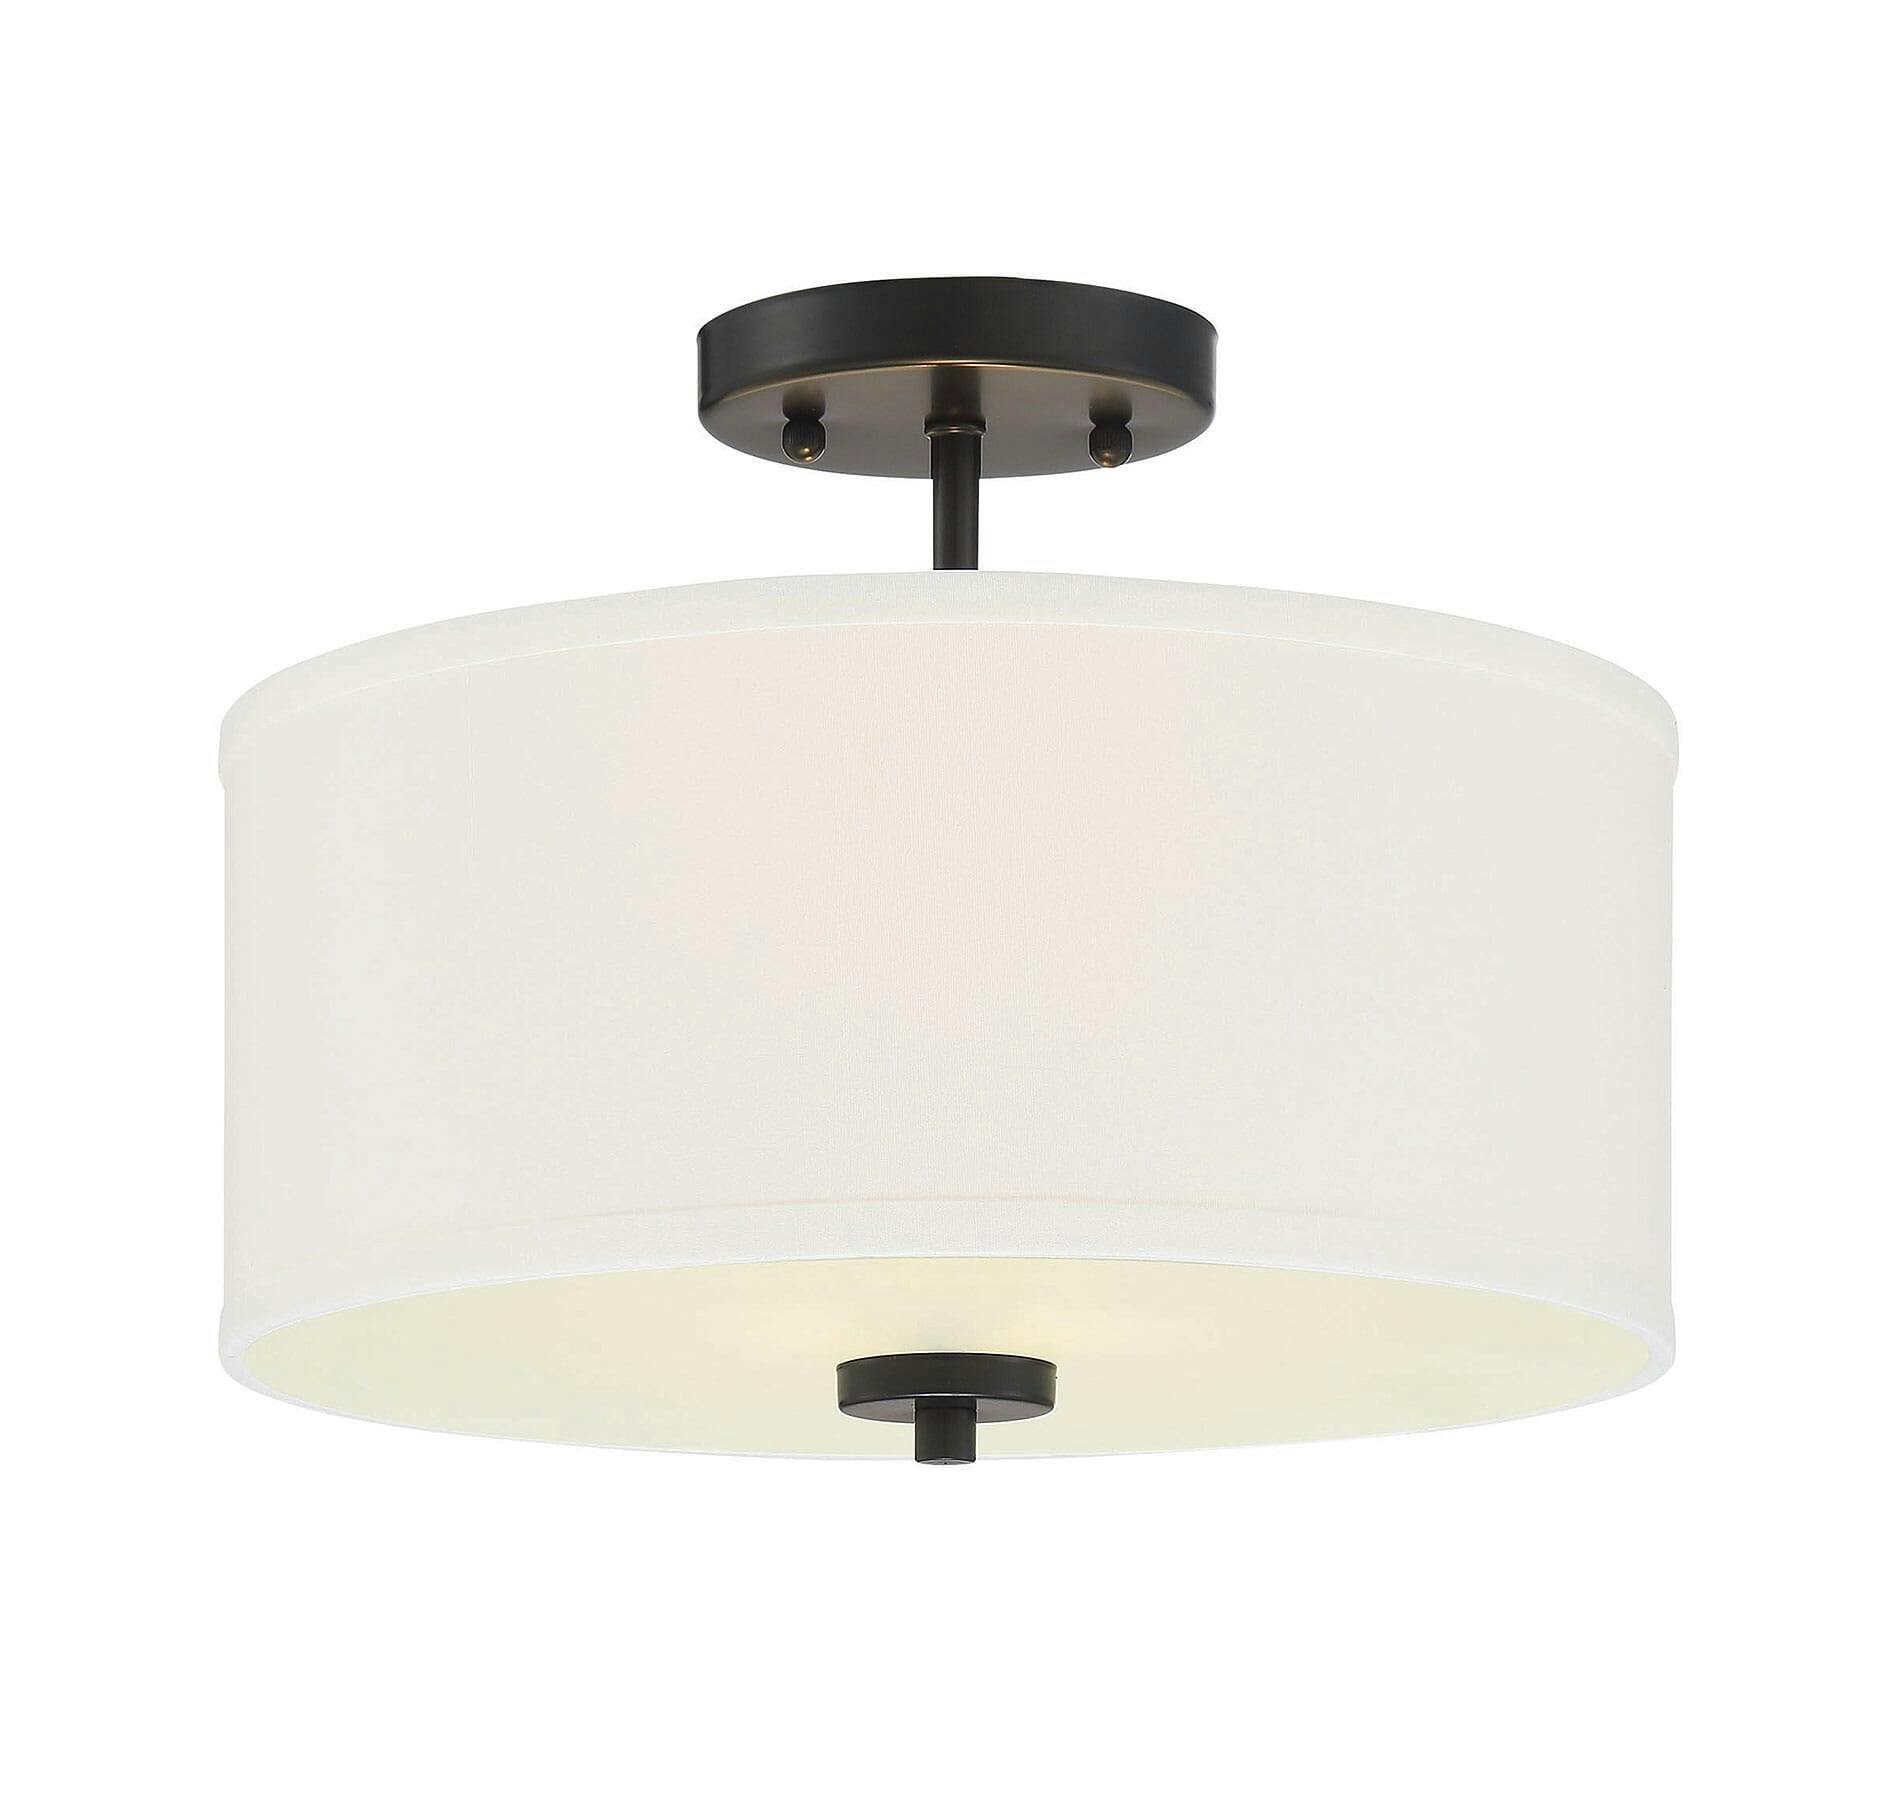 Cassie Contemporary Matte Black Drum Ceiling Light with White Shade